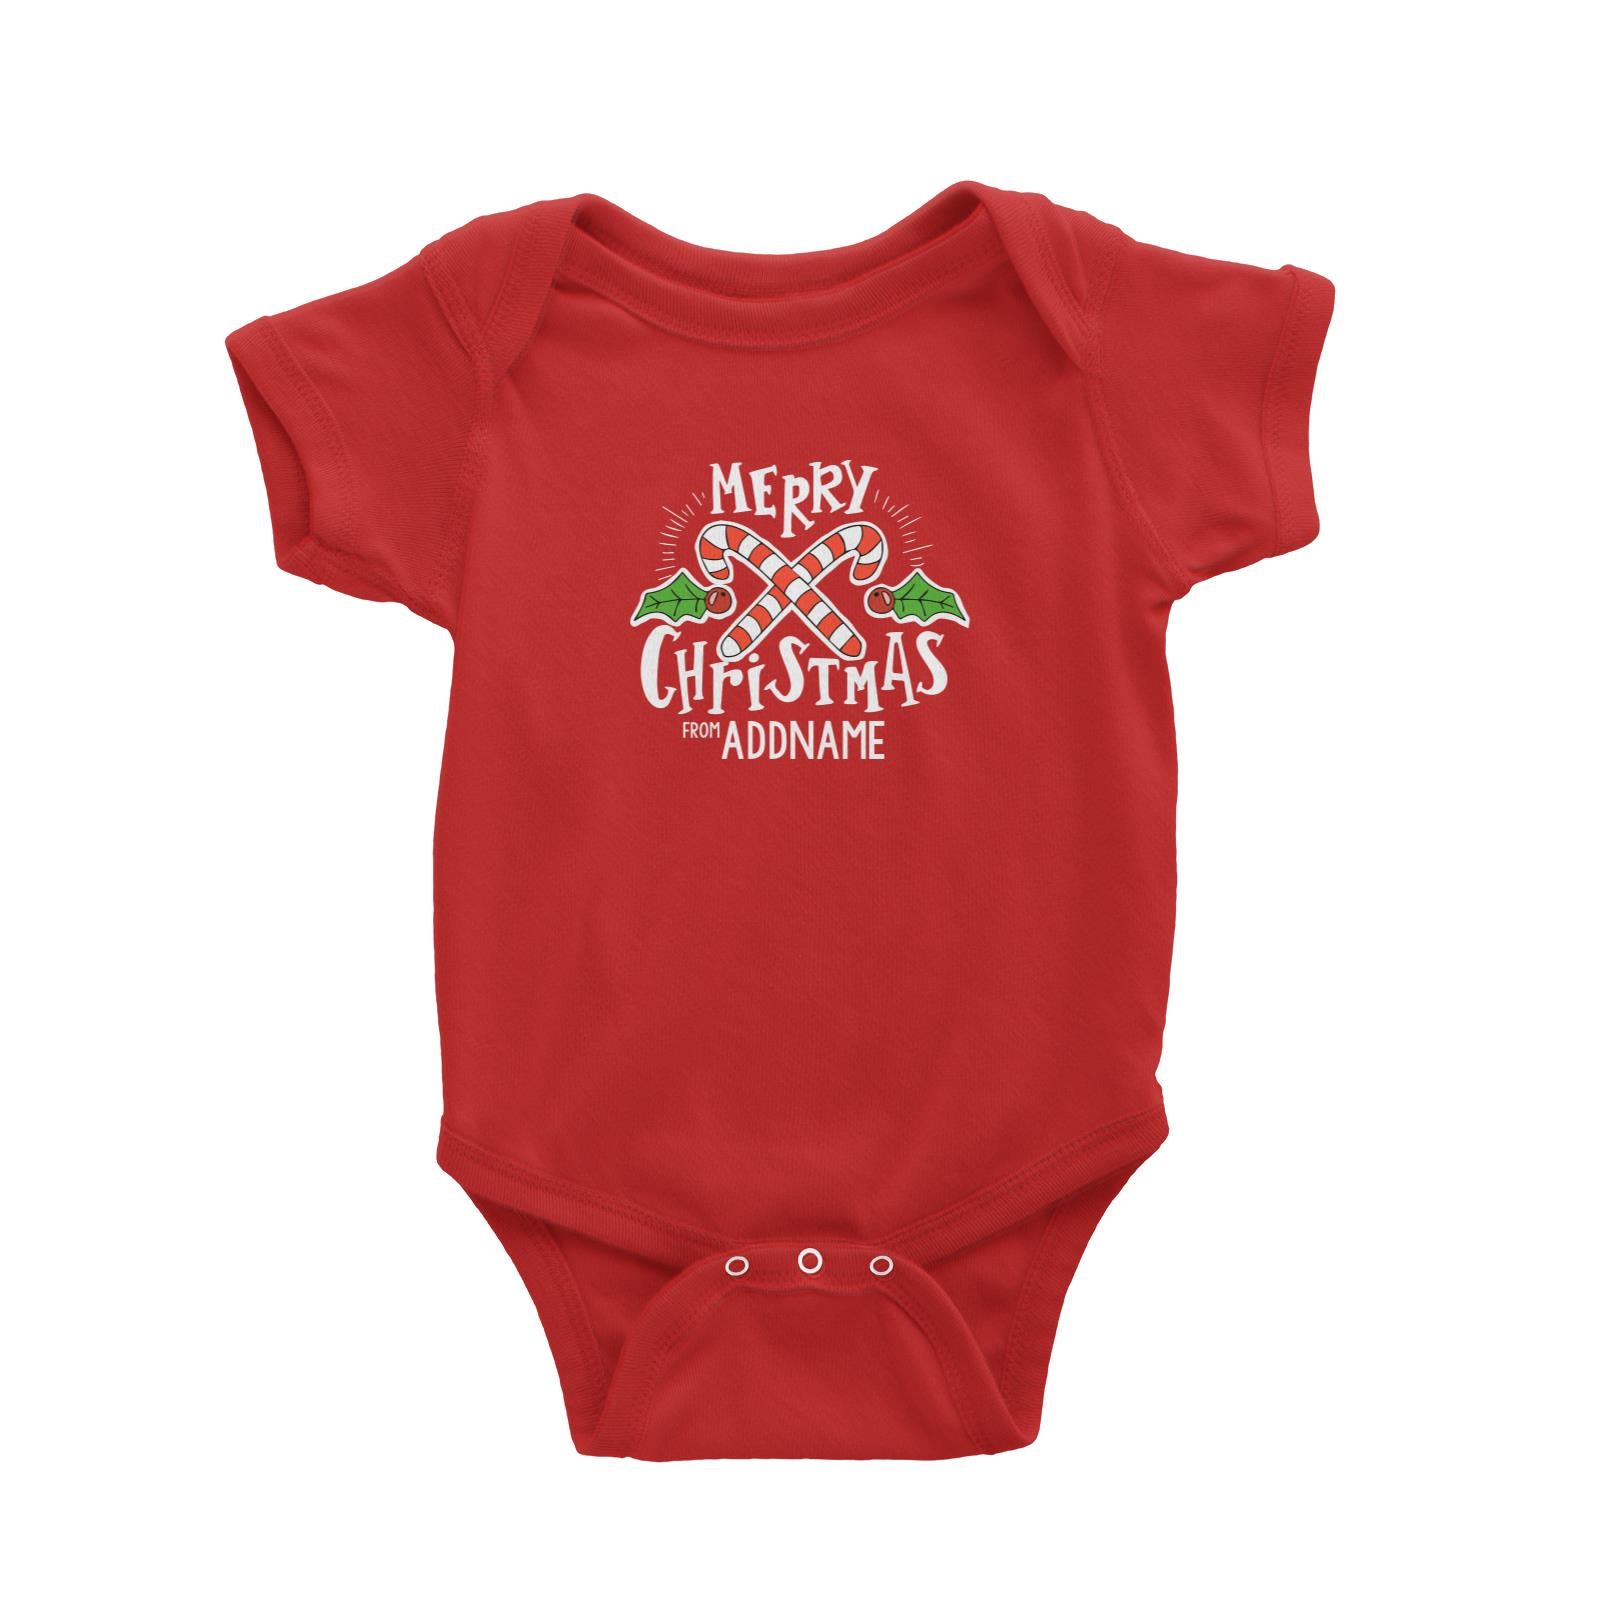 Merry Chrismas with Holly and Candy Cane Greeting Addname Baby Romper Christmas Matching Family Personalizable Designs Lettering